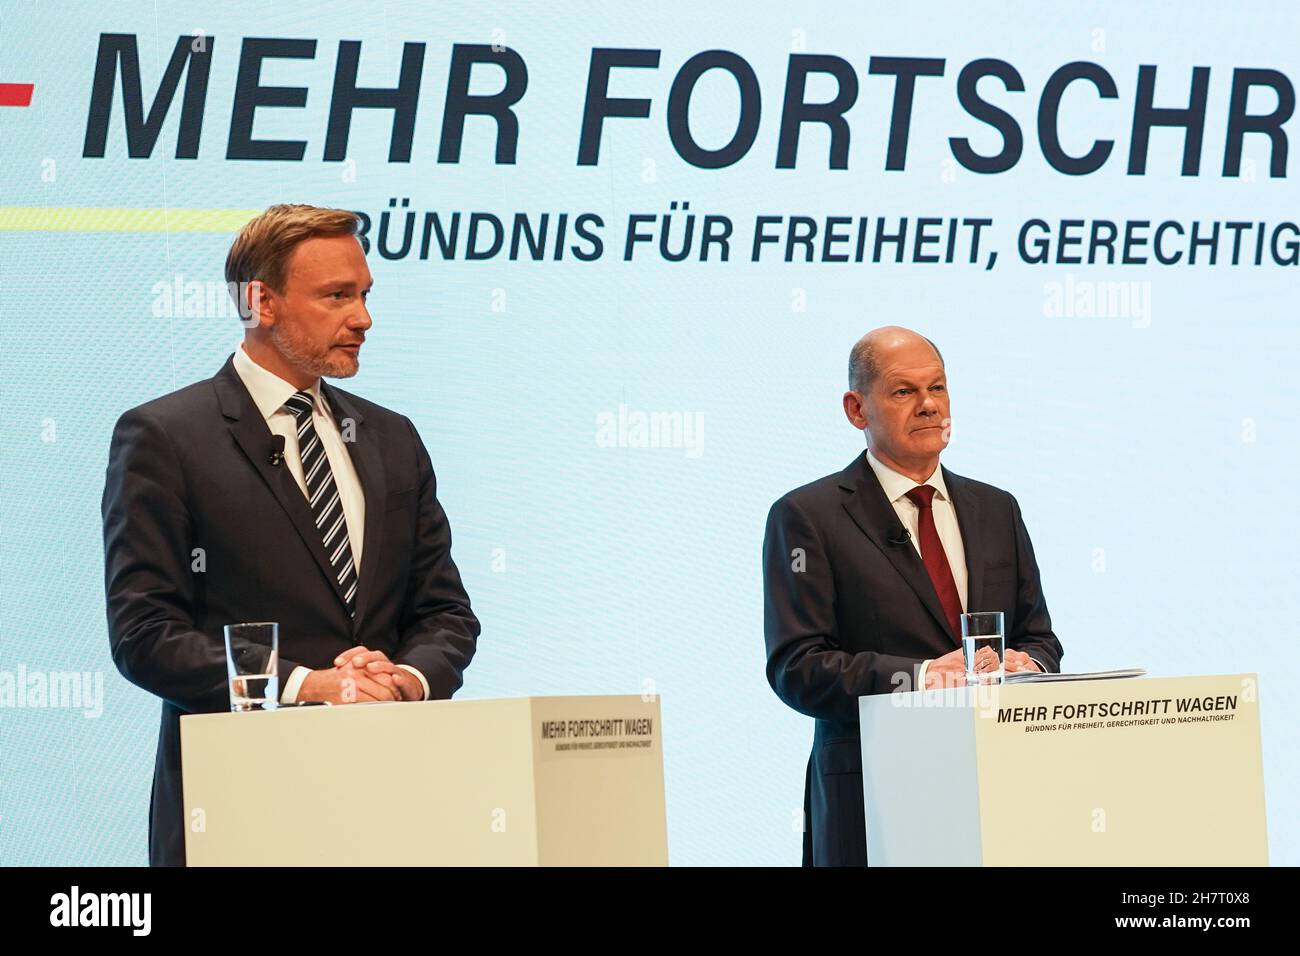 Berlin, Germany. 24th Nov, 2021. Leader of Germany's Free Democratic Party (FDP) Christian Lindner (L) and Olaf Scholz of the Social Democratic Party (SPD) attend a joint press conference in Berlin, Germany, on Nov. 24, 2021. Coalition negotiations among Germany's Social Democratic Party (SPD), the Greens and the Free Democratic Party (FDP) ended as the three parties presented an agreement on Wednesday. Credit: Stefan Zeitz/Xinhua/Alamy Live News Stock Photo